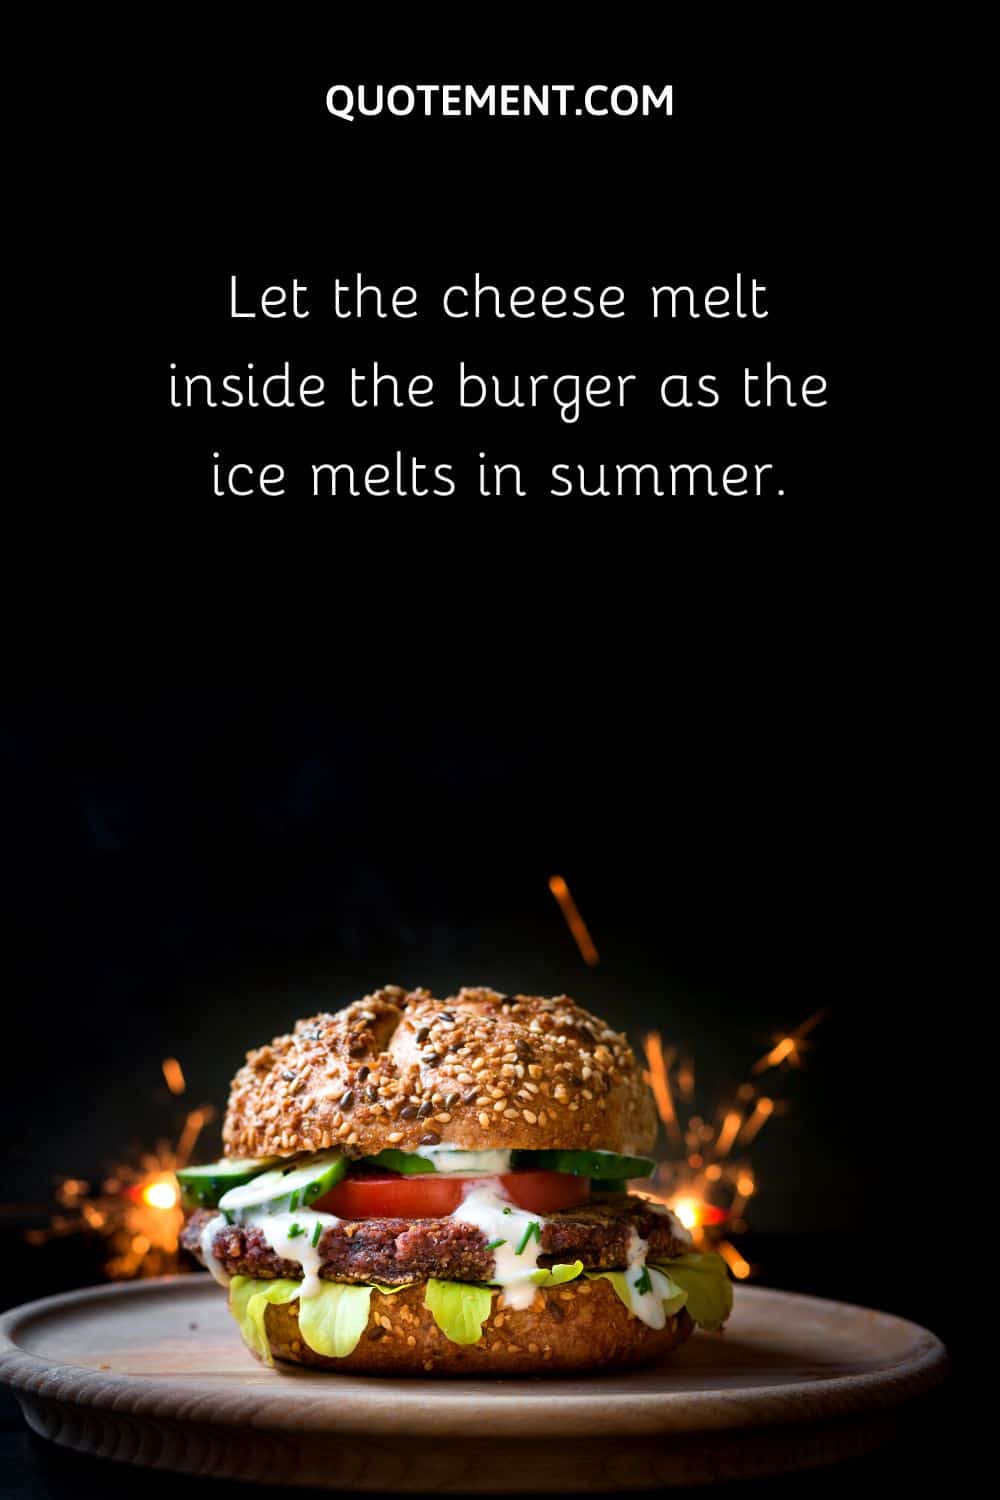 Let the cheese melt inside the burger as the ice melts in summer.